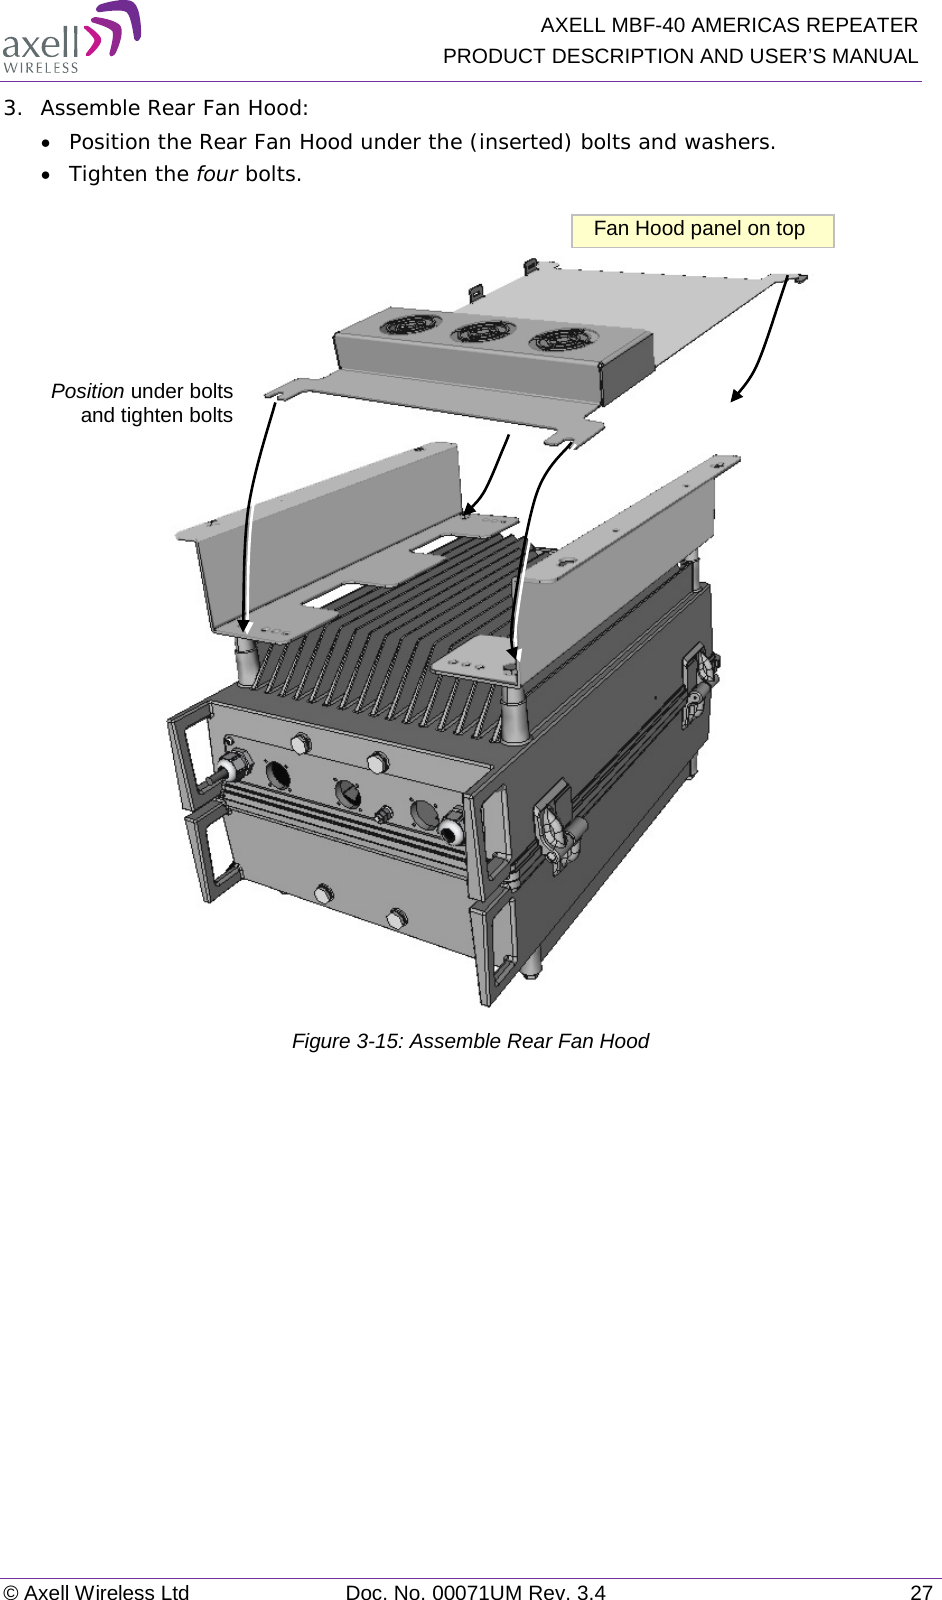   AXELL MBF-40 AMERICAS REPEATER PRODUCT DESCRIPTION AND USER’S MANUAL © Axell Wireless Ltd Doc. No. 00071UM Rev. 3.4 27 3.  Assemble Rear Fan Hood: • Position the Rear Fan Hood under the (inserted) bolts and washers. • Tighten the four bolts.   Figure  3-15: Assemble Rear Fan Hood   Position under bolts  and tighten bolts Fan Hood panel on top 